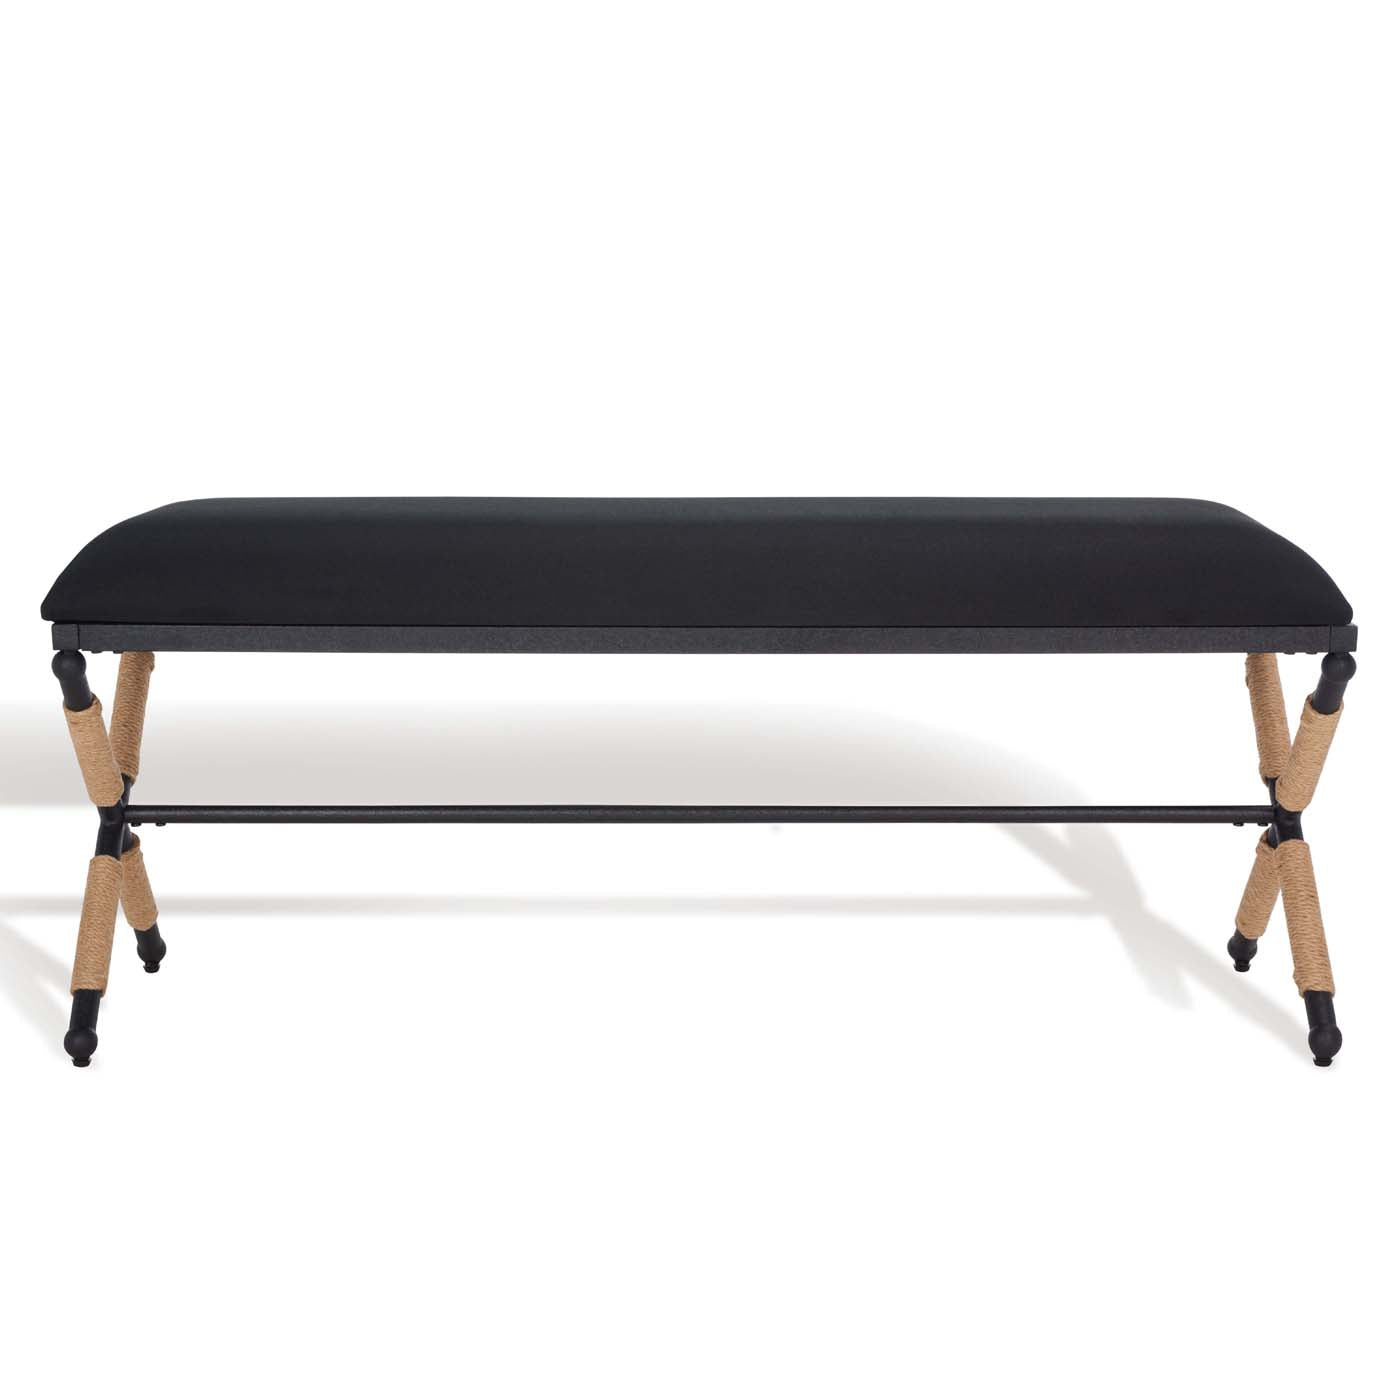 Safavieh Couture Carmelo Hemp Wrapped Bench